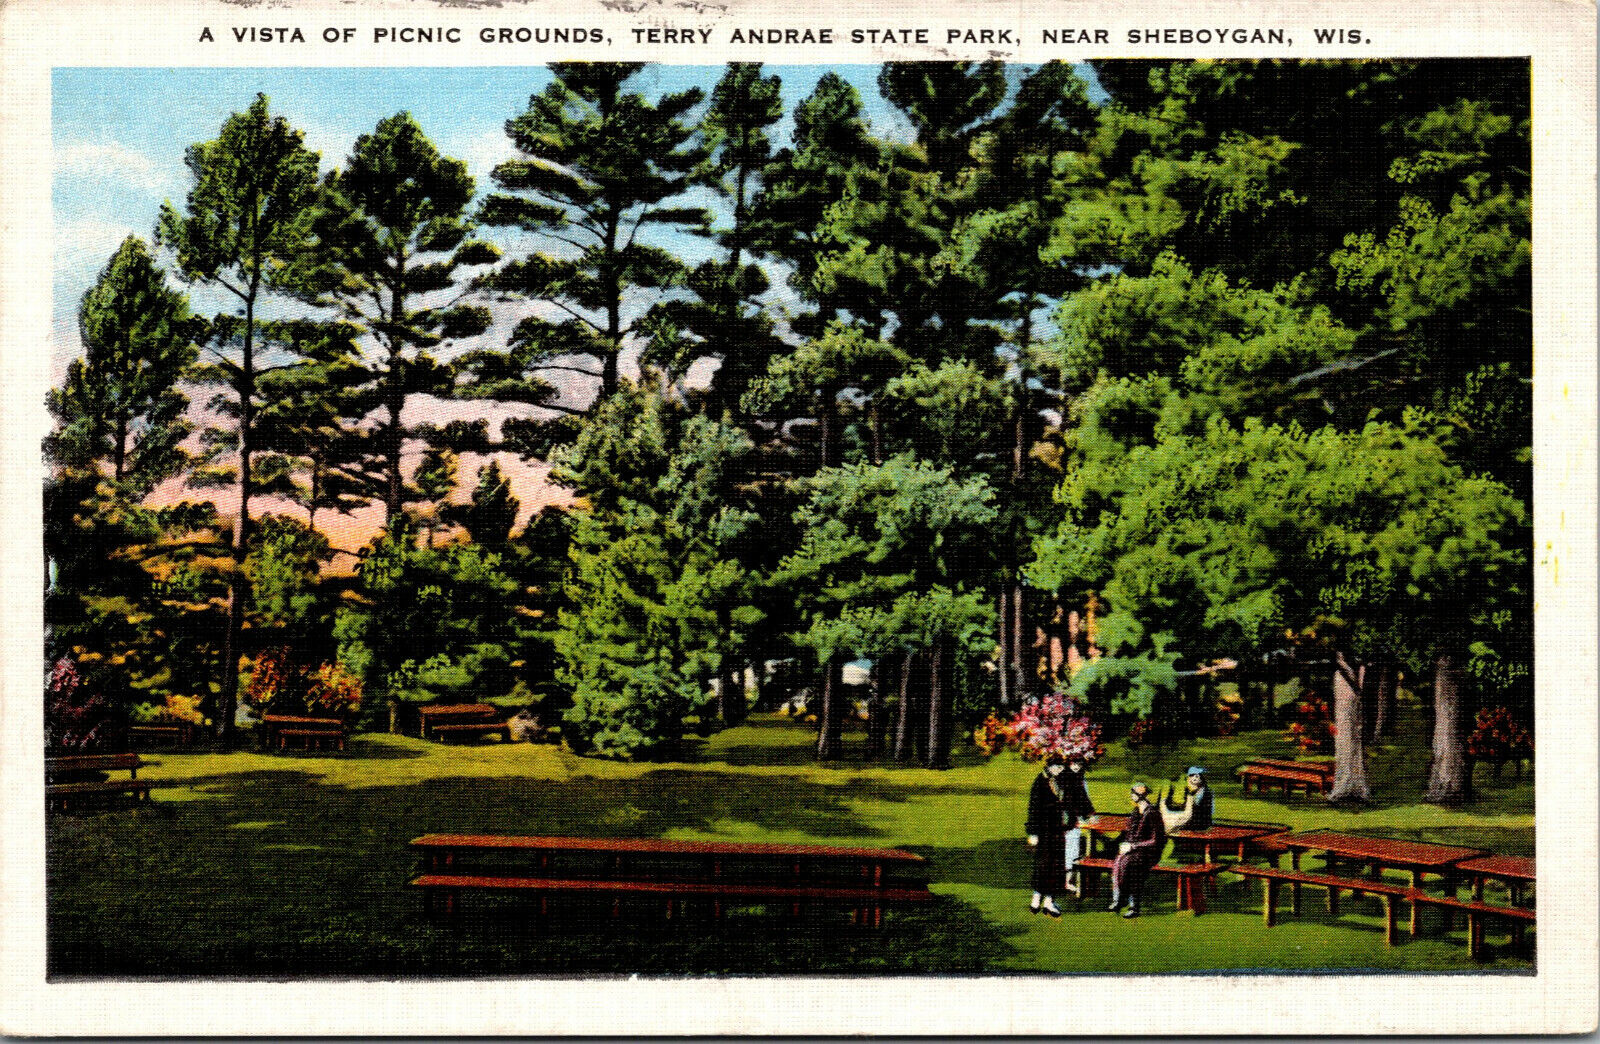 Vtg 1930s Picnic Grounds Terry Andrae State Park Sheboygan Wisconsin WI Postcard